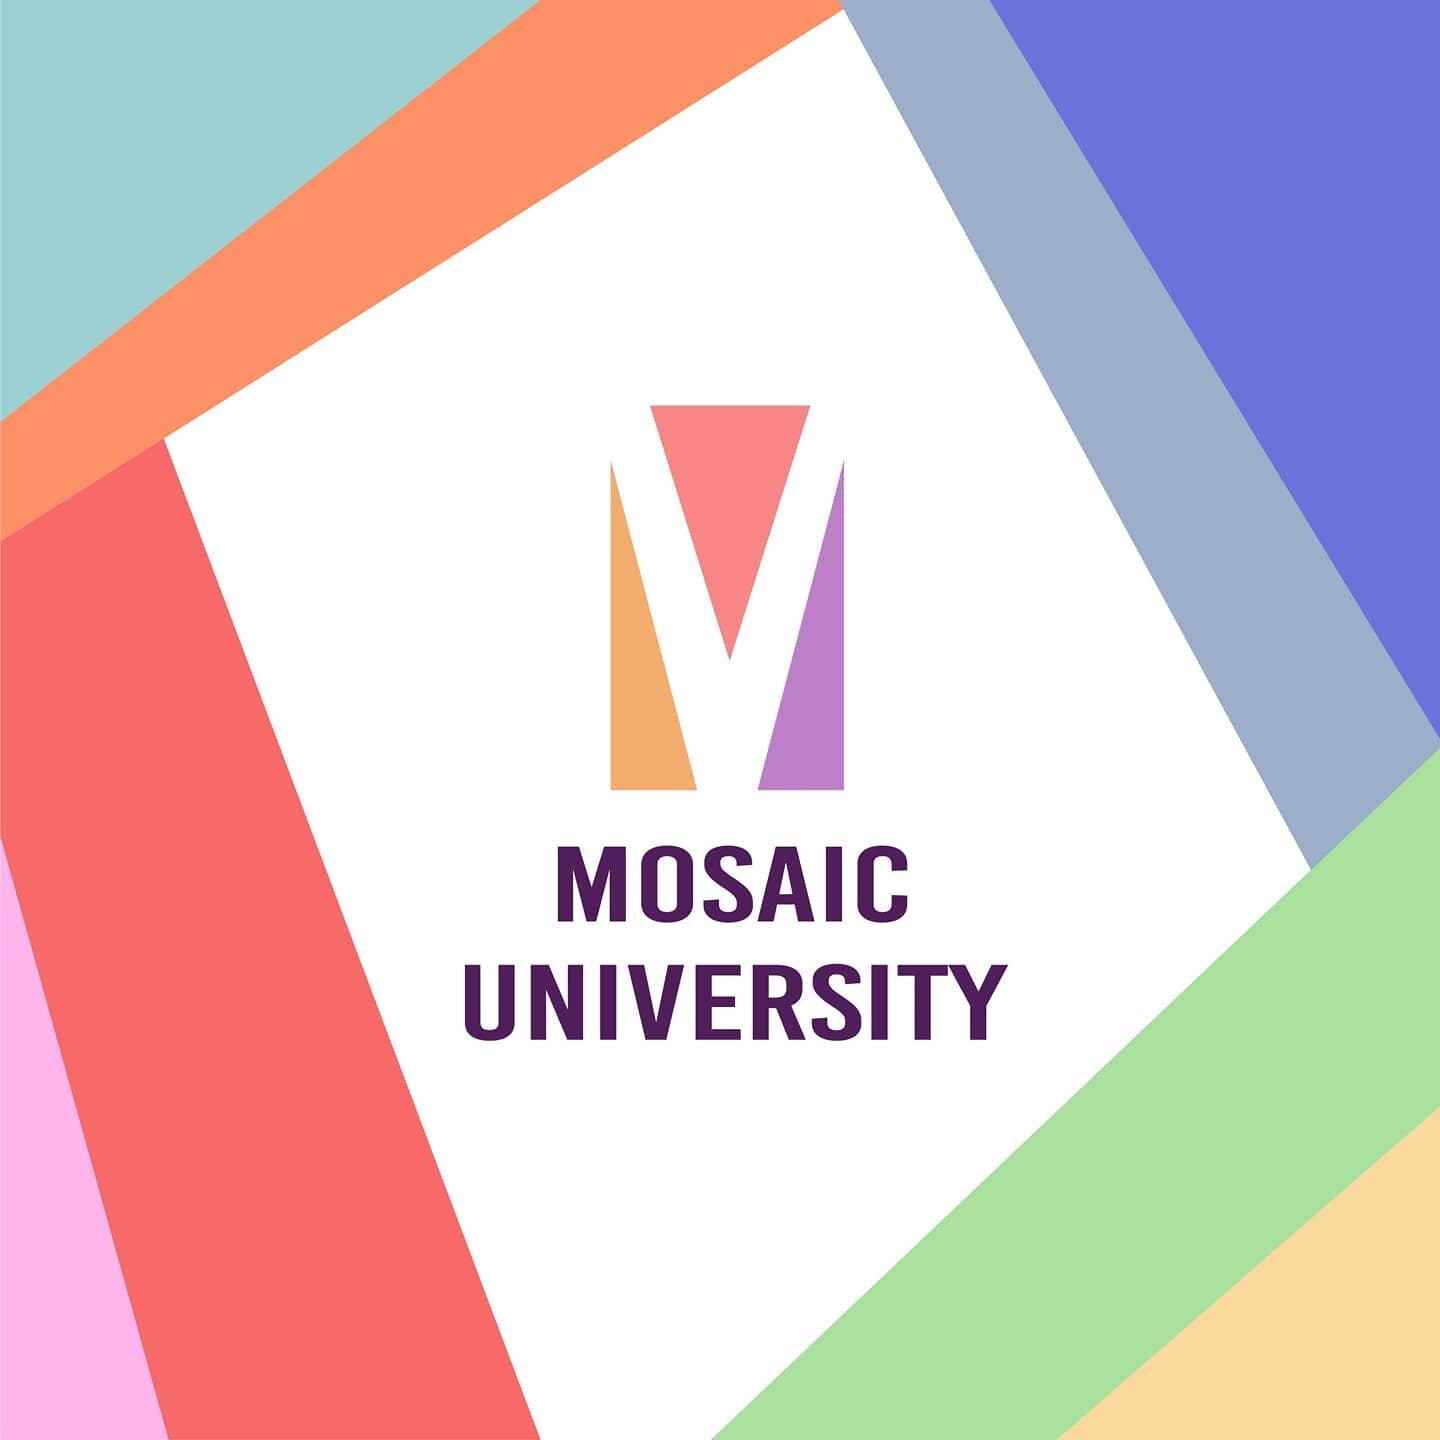 Taking on a daily &quot;quick fire&quot; design challenge to keep the creative juices flowing. Today's challenge was to design branding for an art school. Mosaic University is an imaginary art and design college. I wanted it to be colorful, but I cho